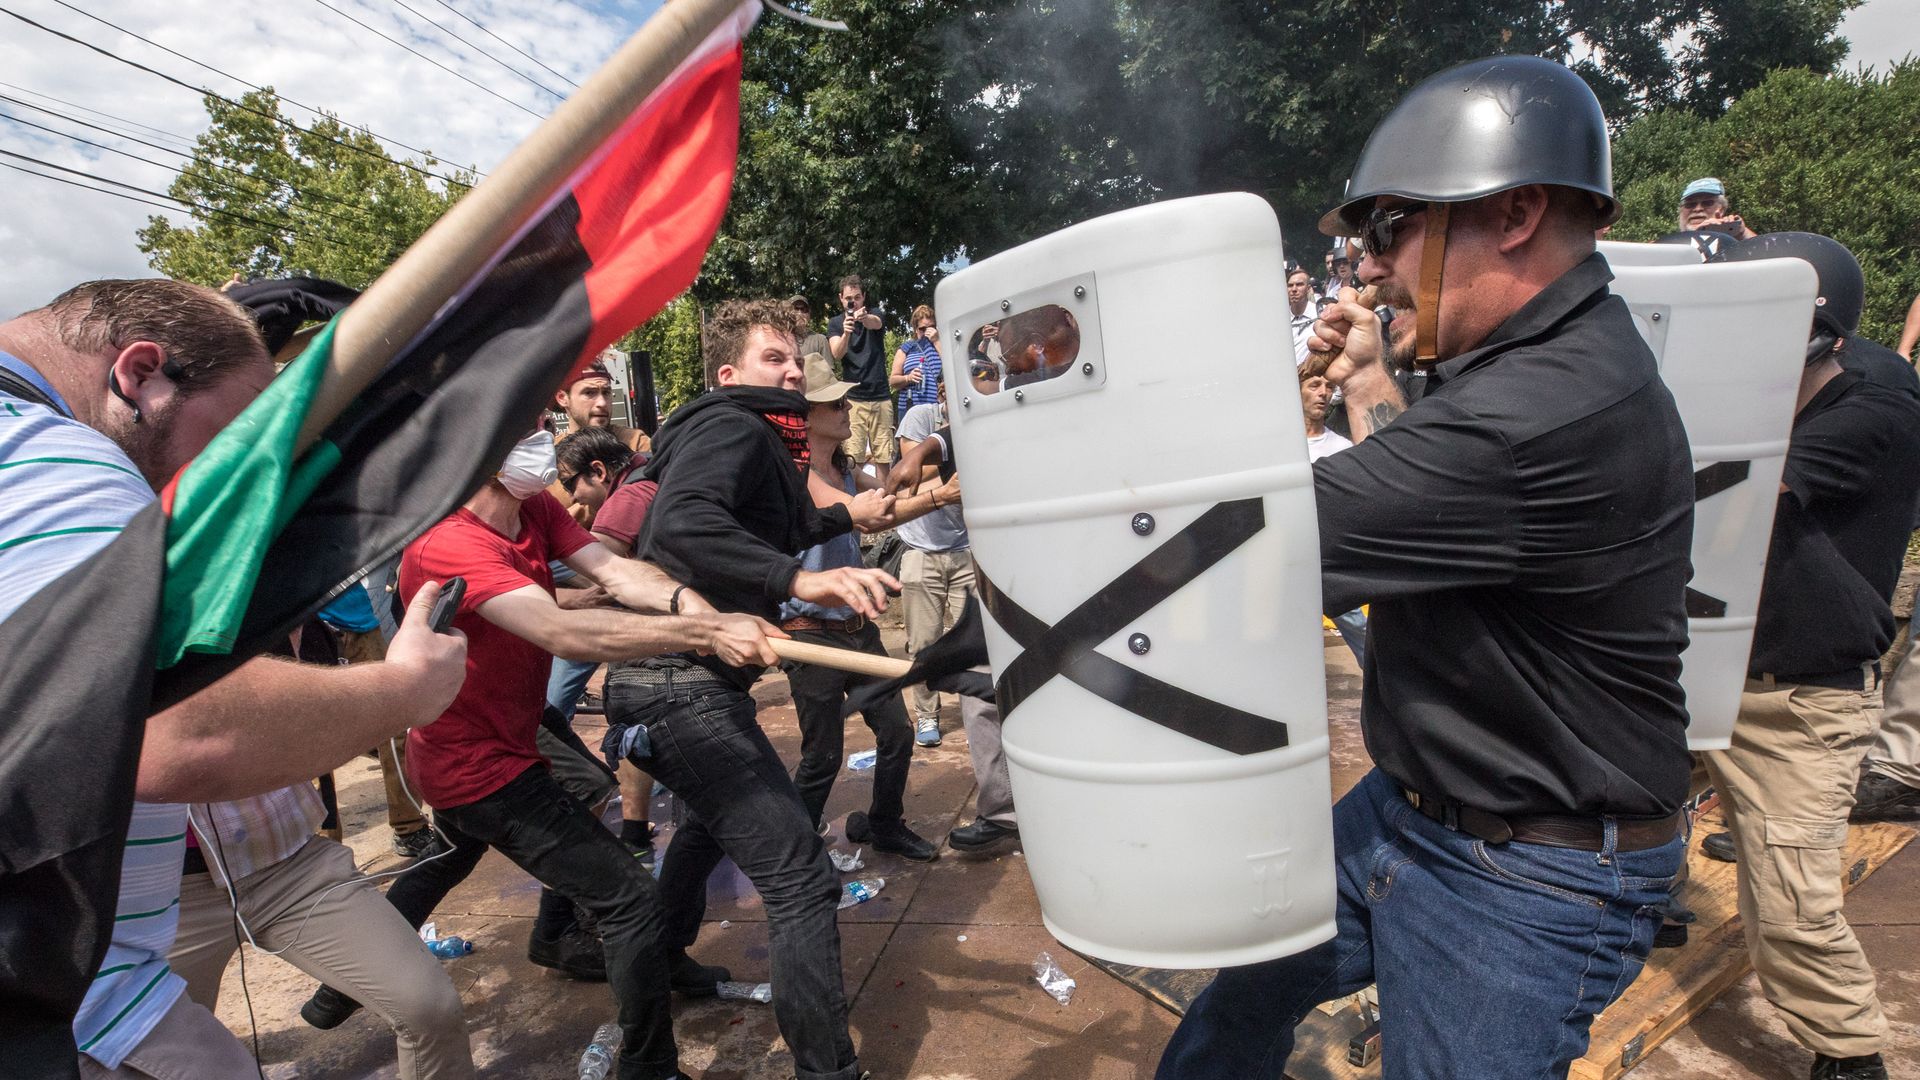 Fighting at Charlottesville rally